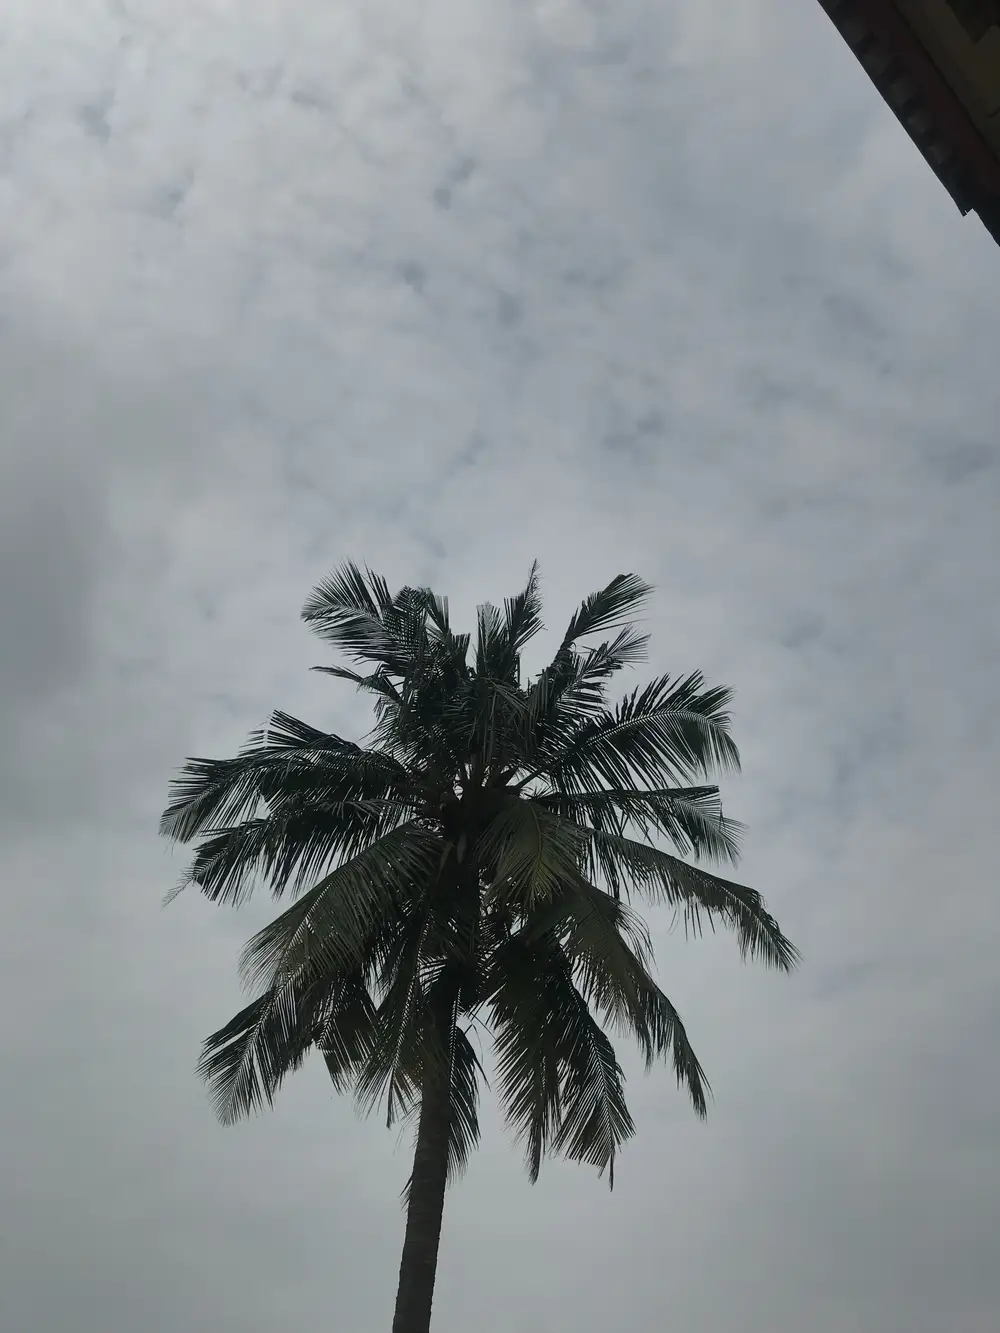 View of a Tall Palm Tree